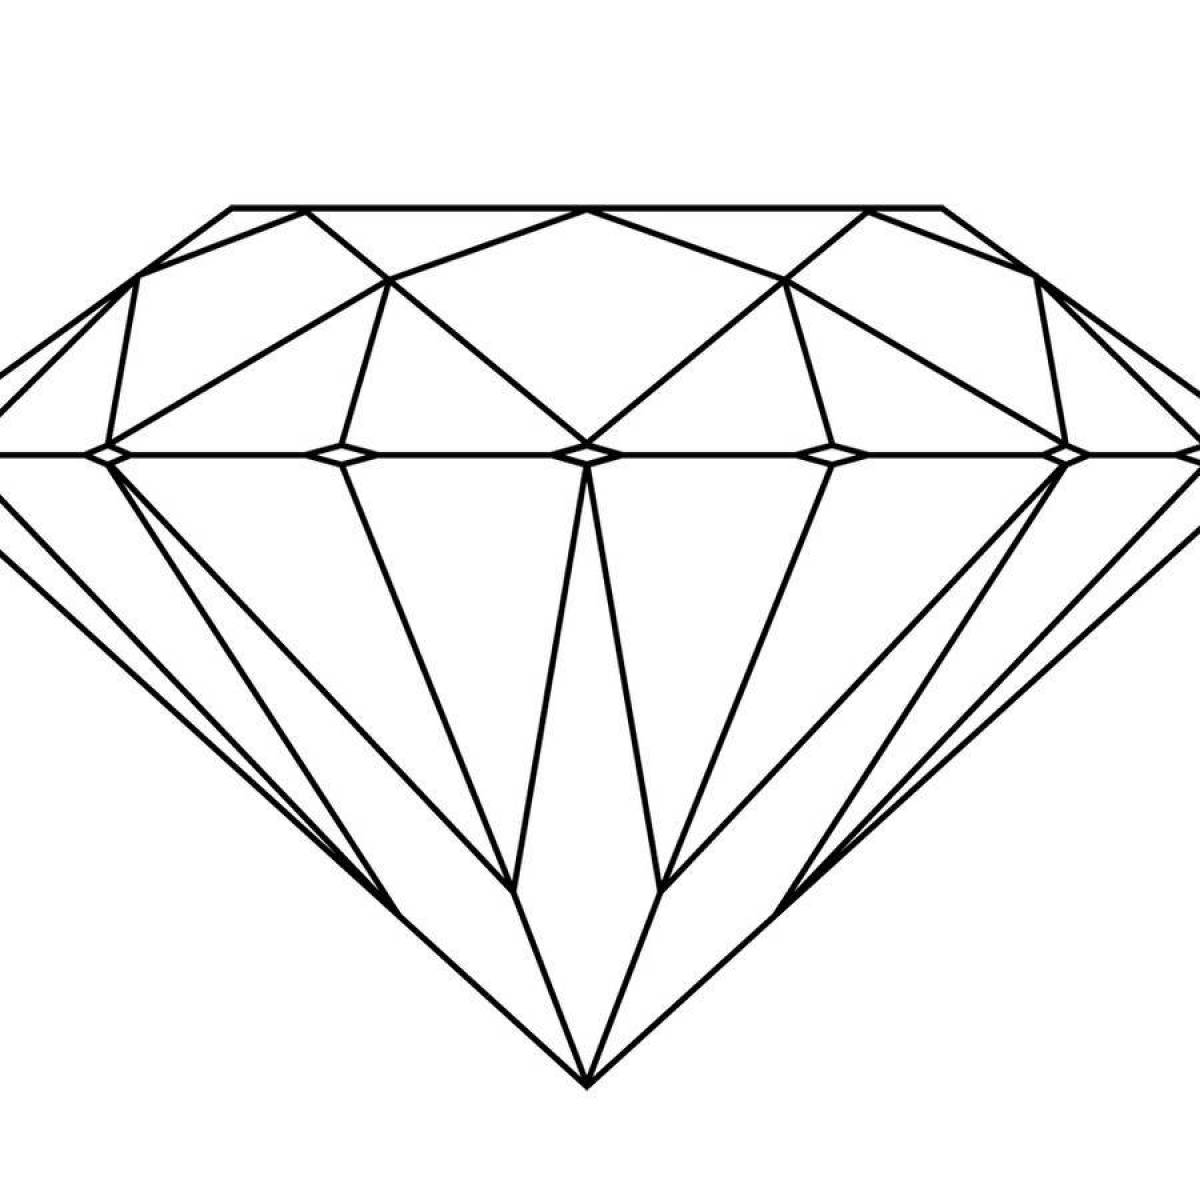 Dazzling diamond coloring book for kids